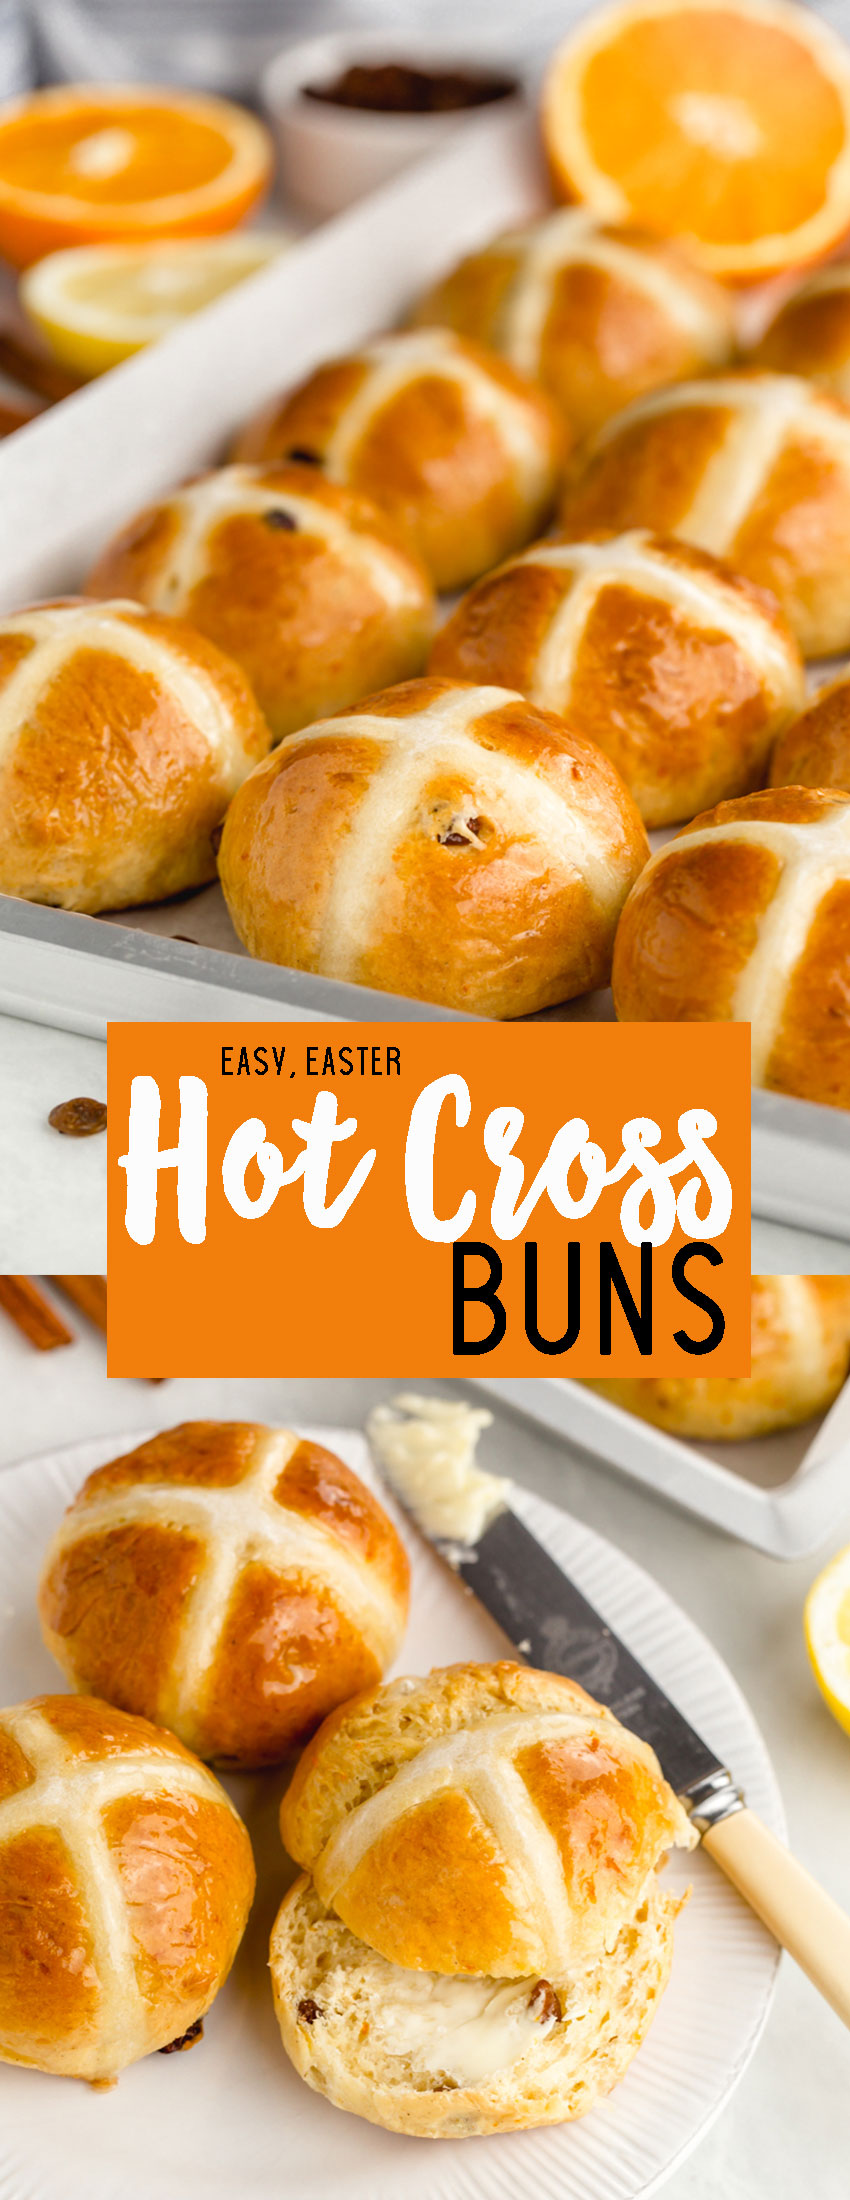 Hot cross buns are a traditional Easter weekend bun with meaning